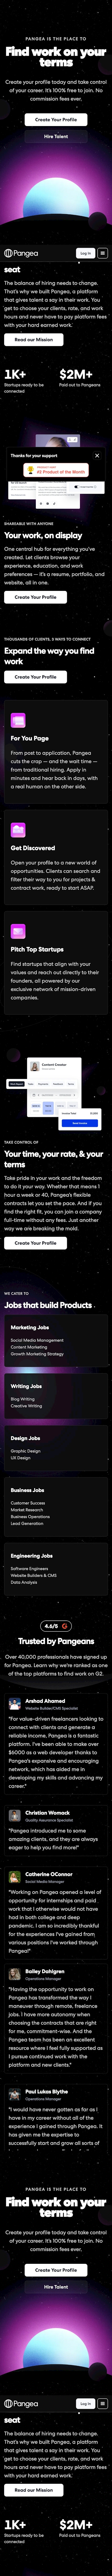 Find Work on Your Terms • Pangea for Talent landing page design